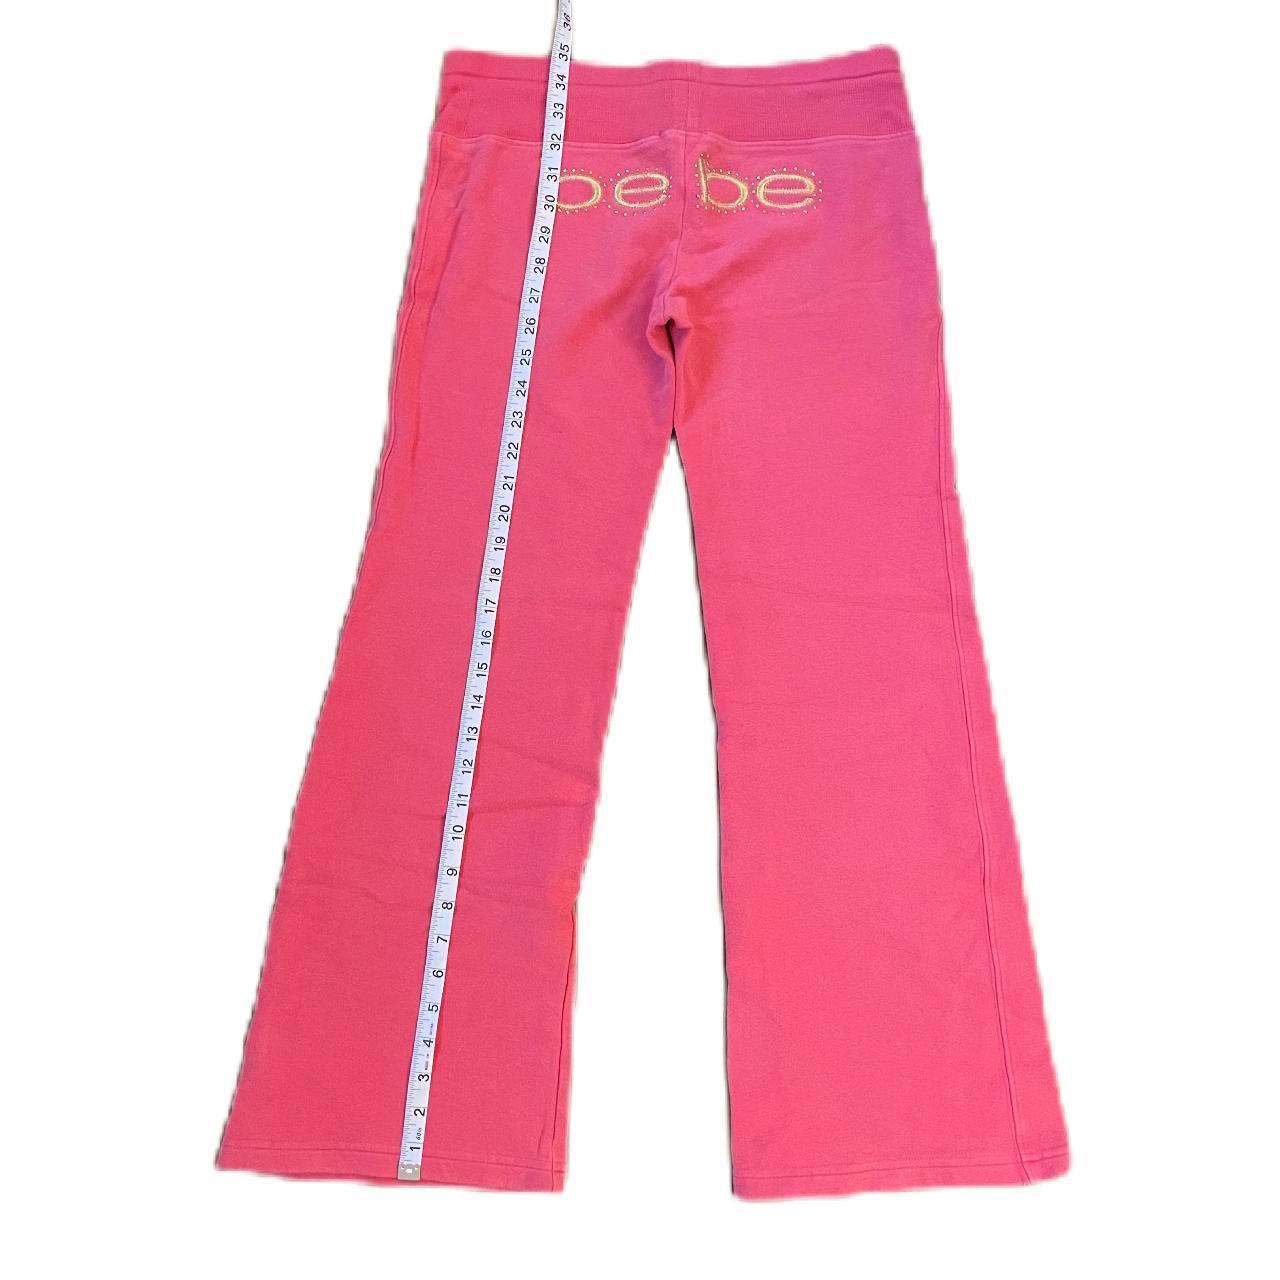 Bebe Women's Pink and Gold Joggers-tracksuits